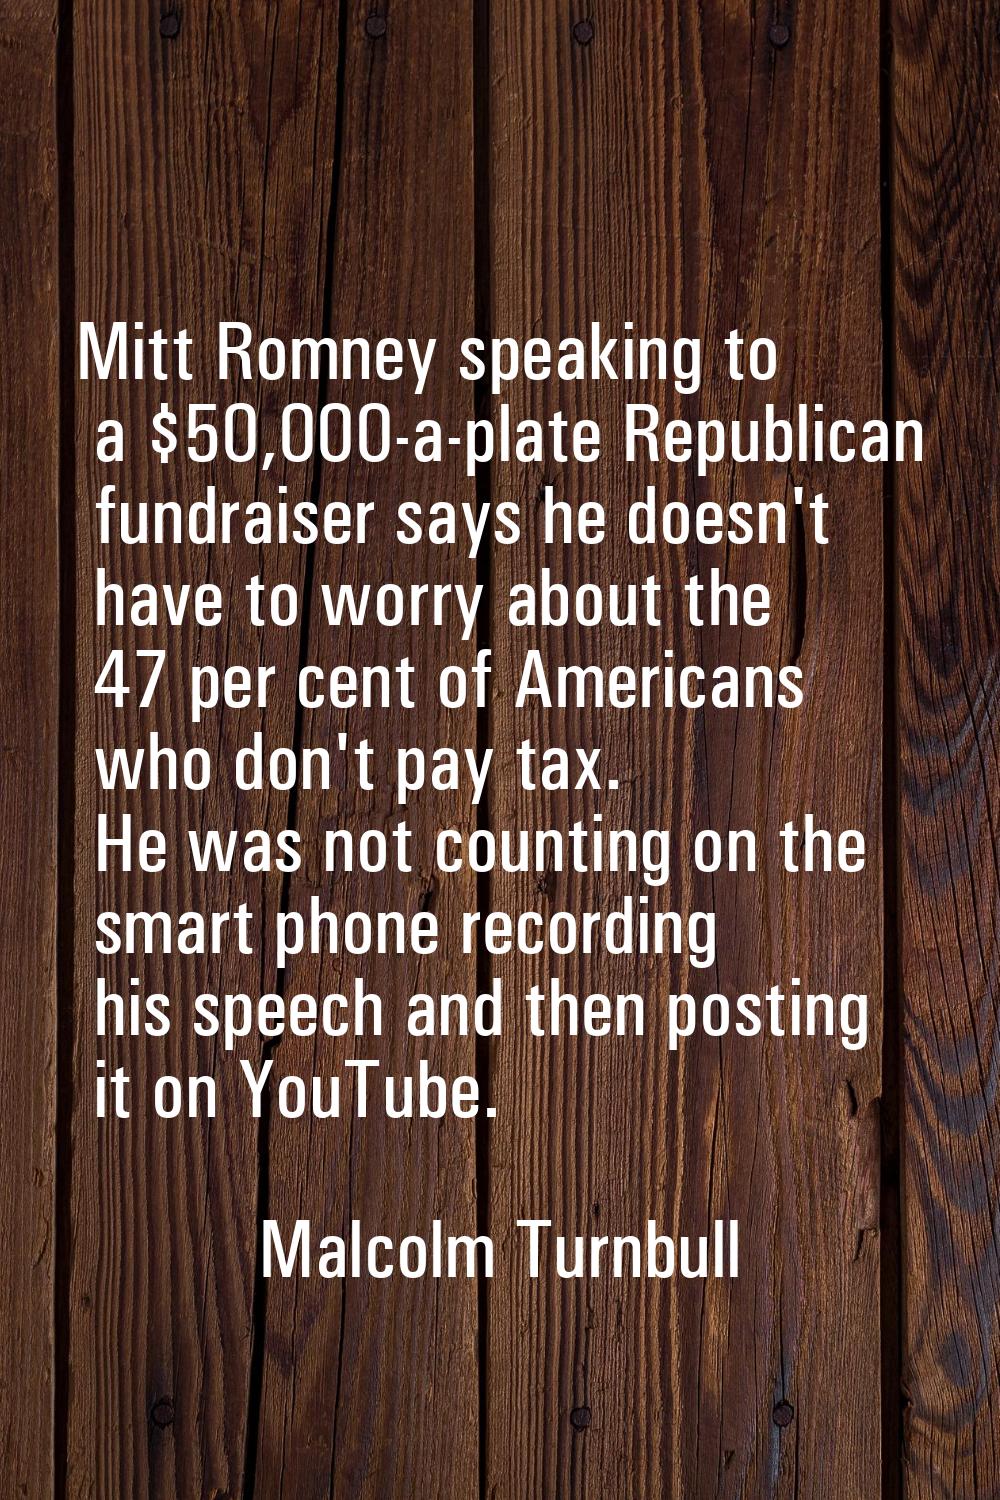 Mitt Romney speaking to a $50,000-a-plate Republican fundraiser says he doesn't have to worry about